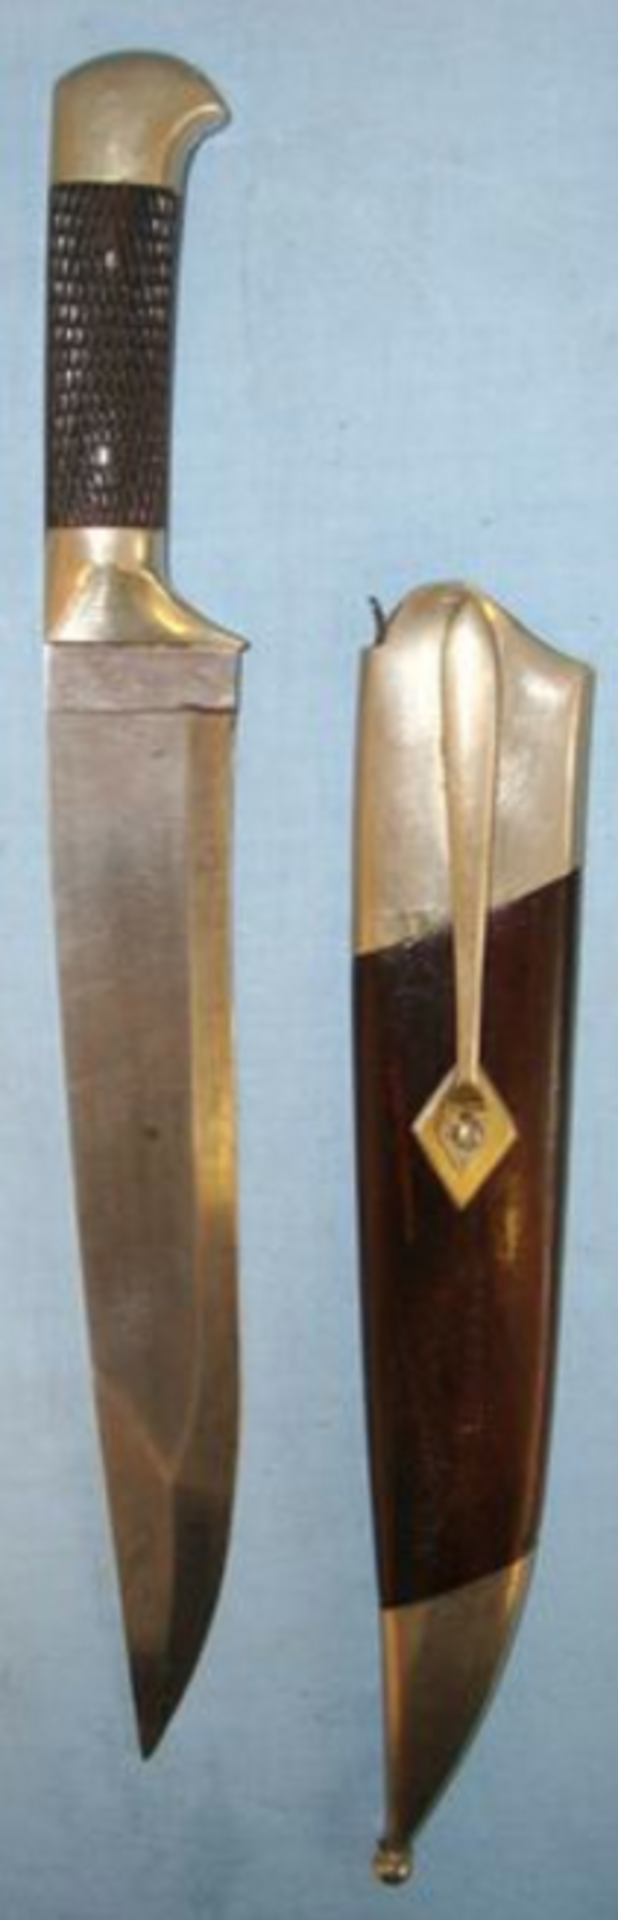 WW2 Far East British Private Purchase Fighting Knife & Scabbard To N. Lloyd 5th Para 4 Brigade - Image 3 of 3